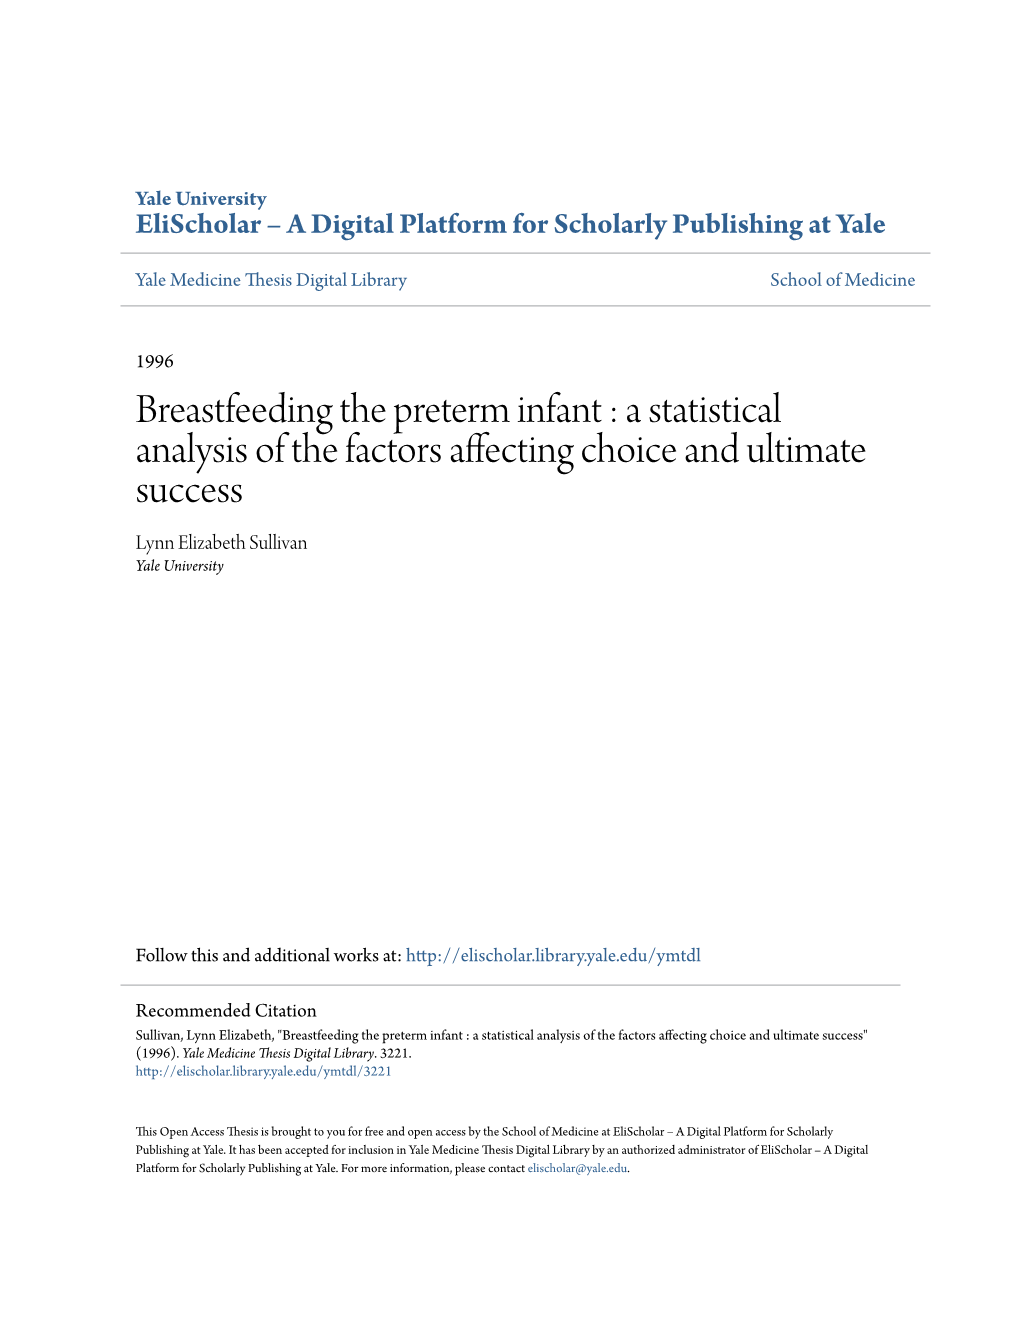 Breastfeeding the Preterm Infant : a Statistical Analysis of the Factors Affecting Choice and Ultimate Success Lynn Elizabeth Sullivan Yale University